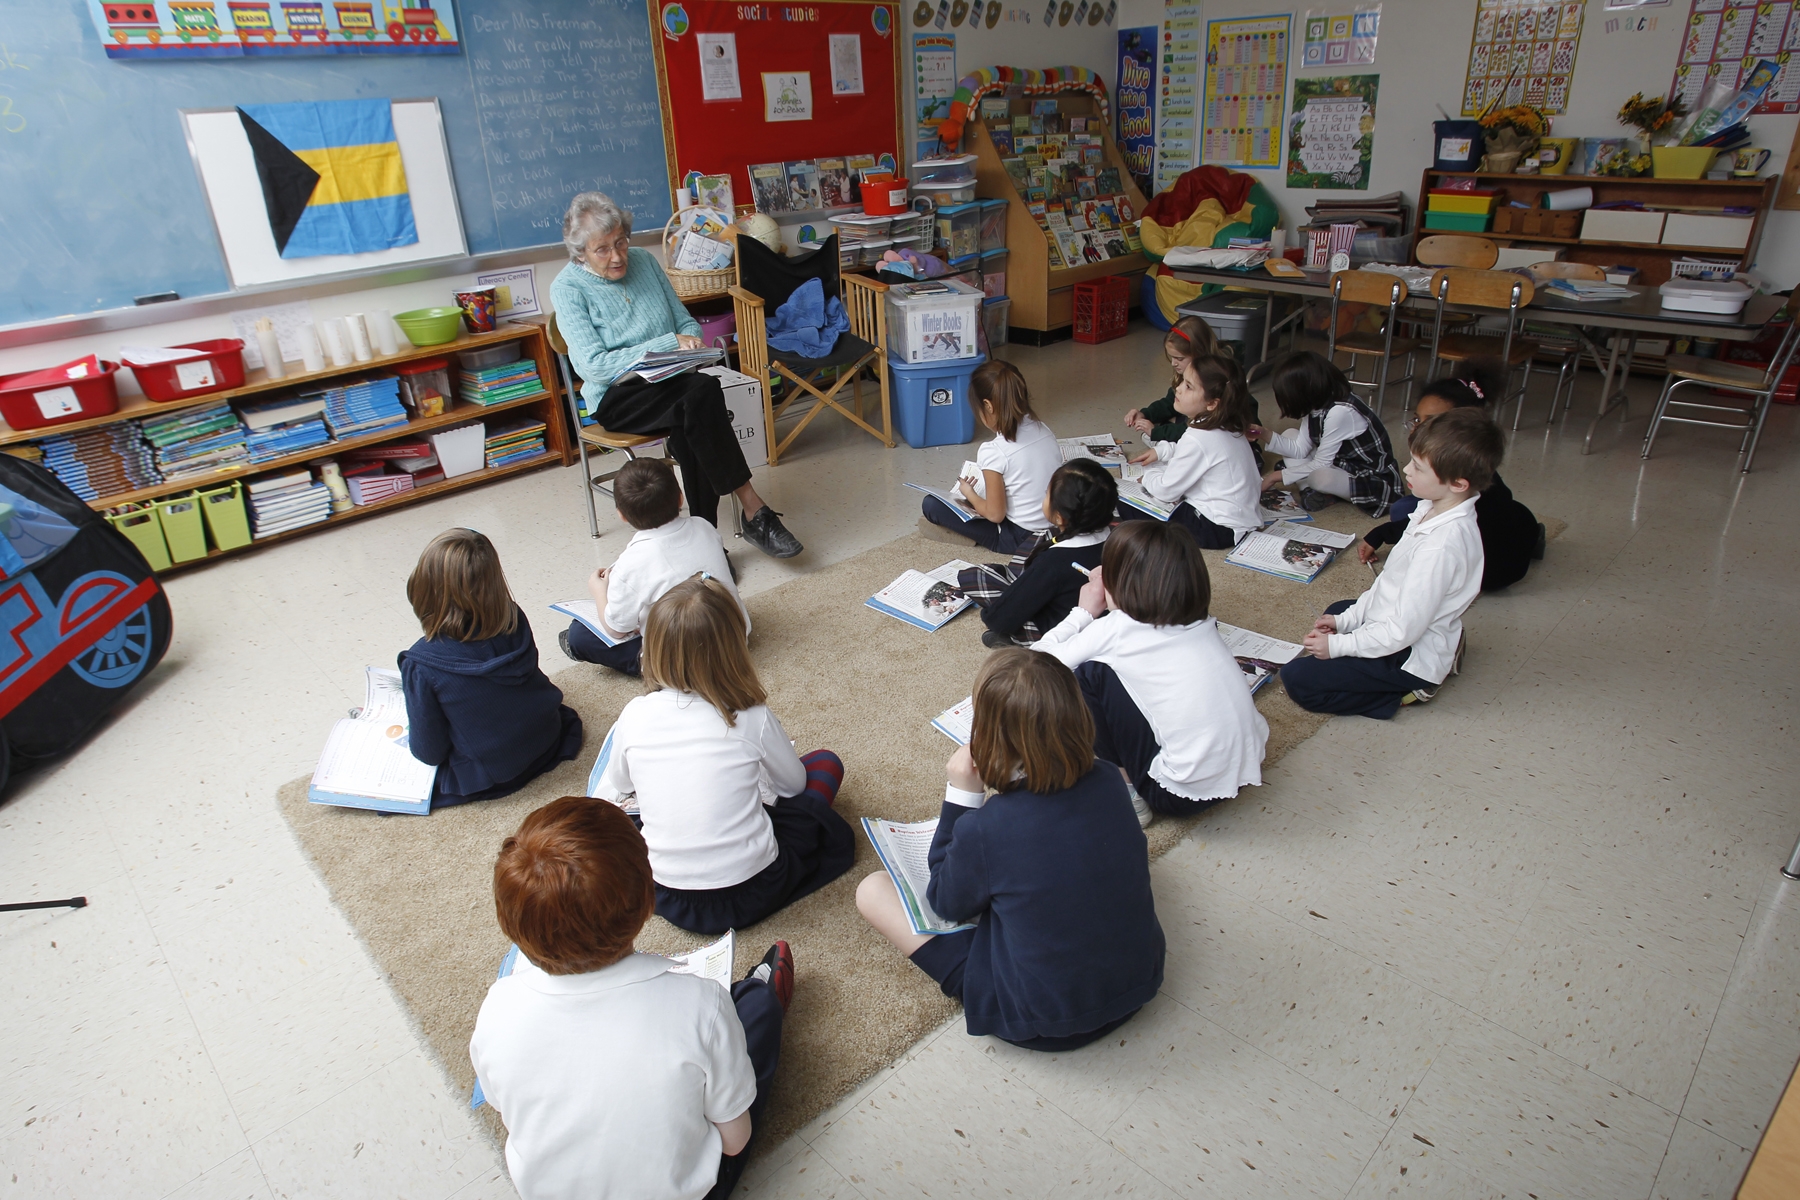 Luella Potter teaching a class at Southern Tier Catholic School.